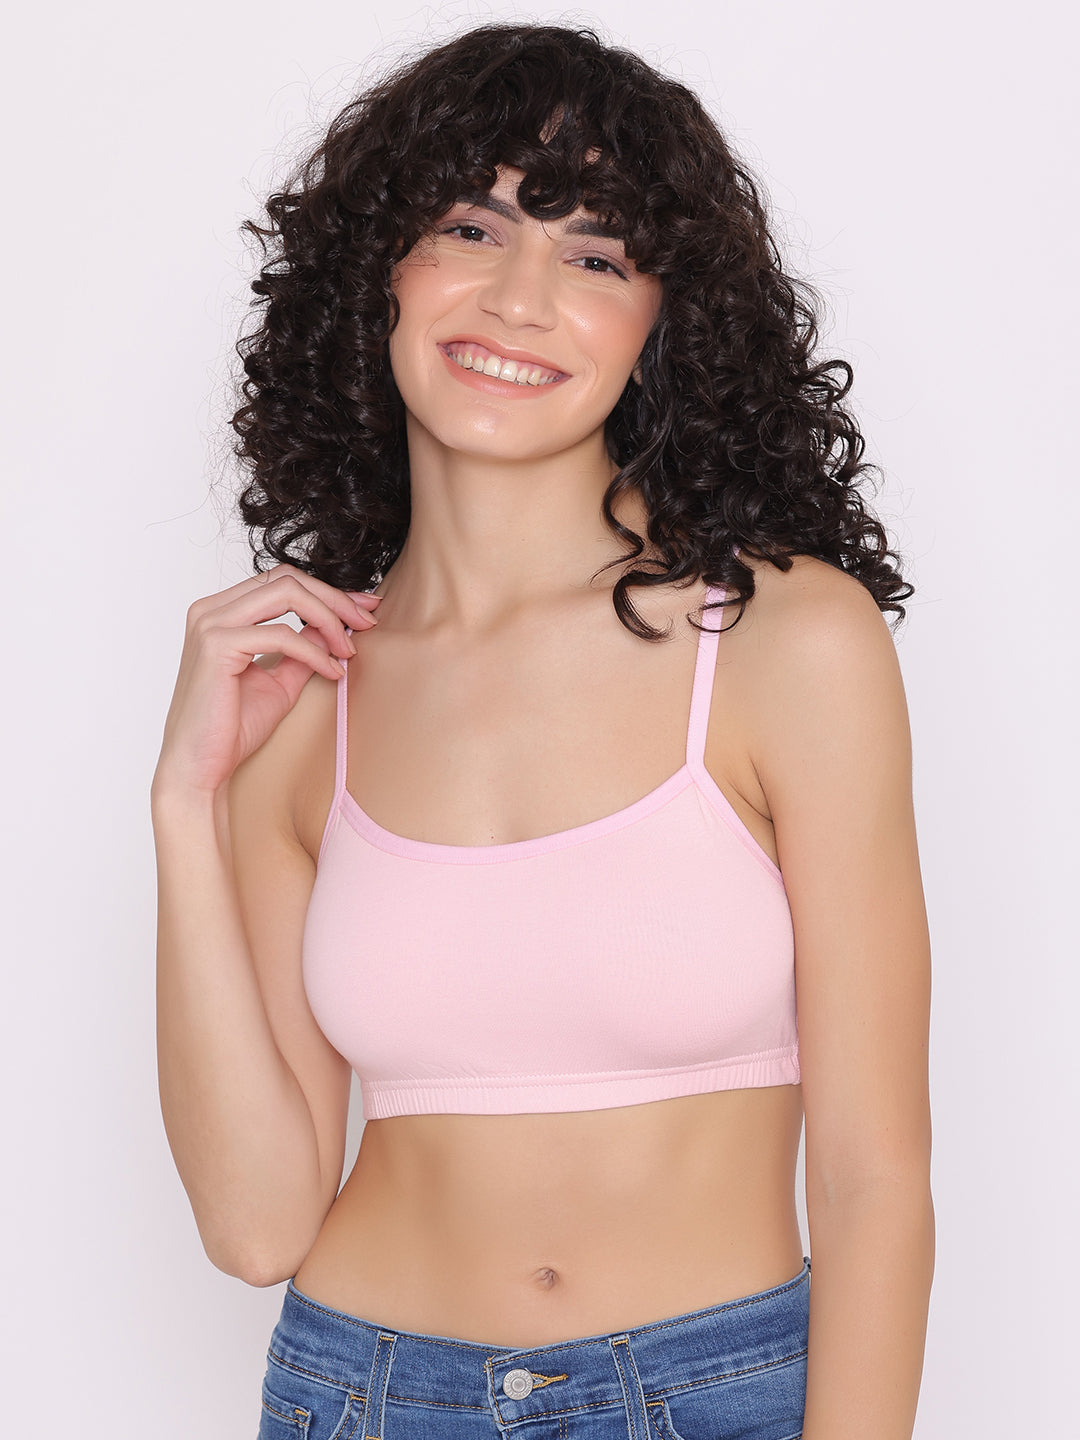 Teenager cotton Sports bras for women's in different sizes and